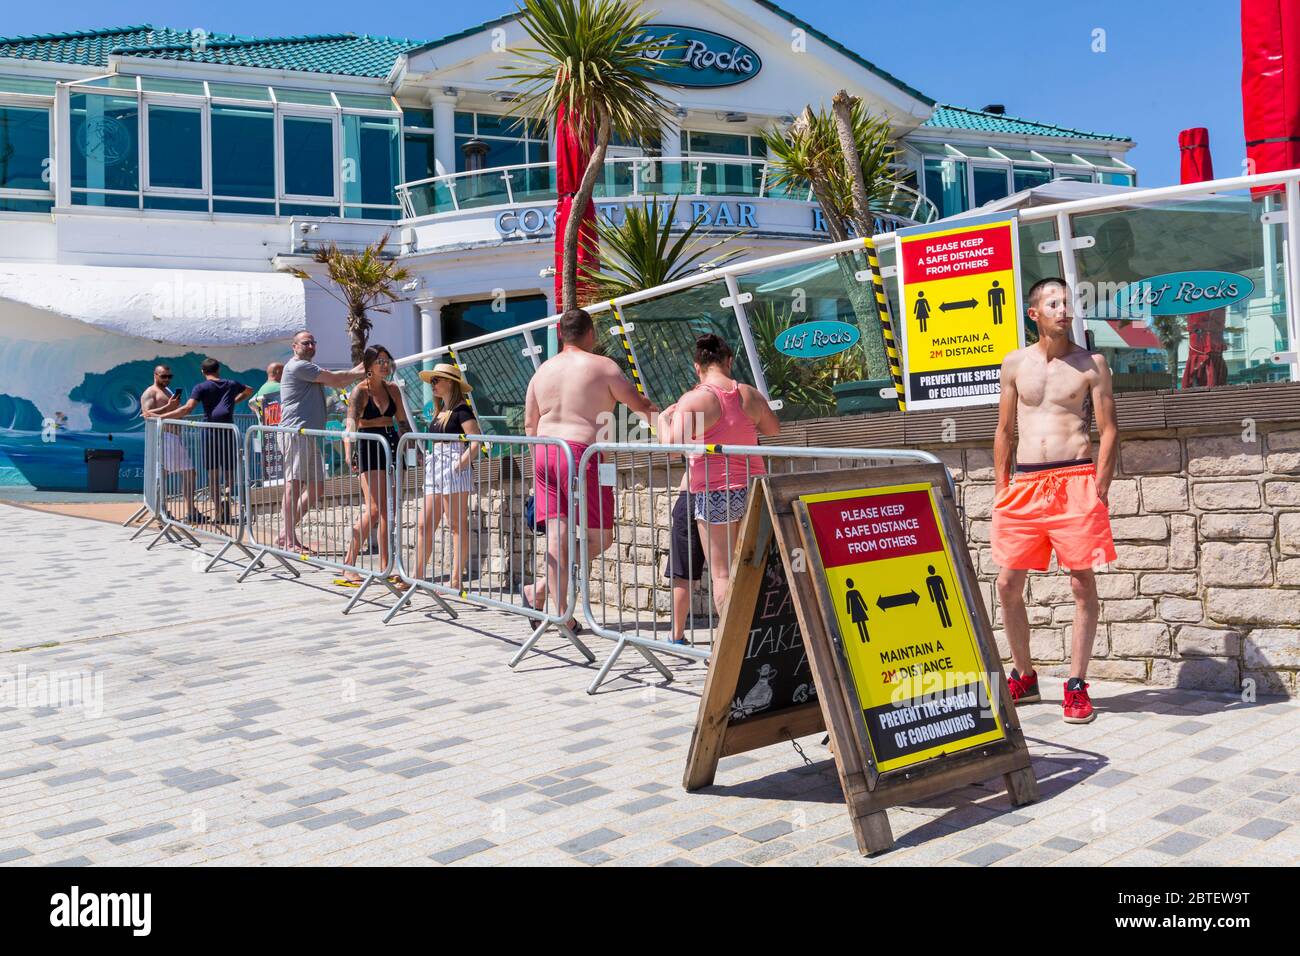 Bournemouth, Dorset UK. 25th May 2020. Social distancing as visitors queue for drinks and take away pizzas at Hot Rocks on a scorching hot day at Bournemouth beaches with clear blue skies and unbroken sunshine, as temperatures soar on Bank Holiday Monday. Sunseekers flock to the seaside and beaches are packed. Credit: Carolyn Jenkins/Alamy Live News Stock Photo